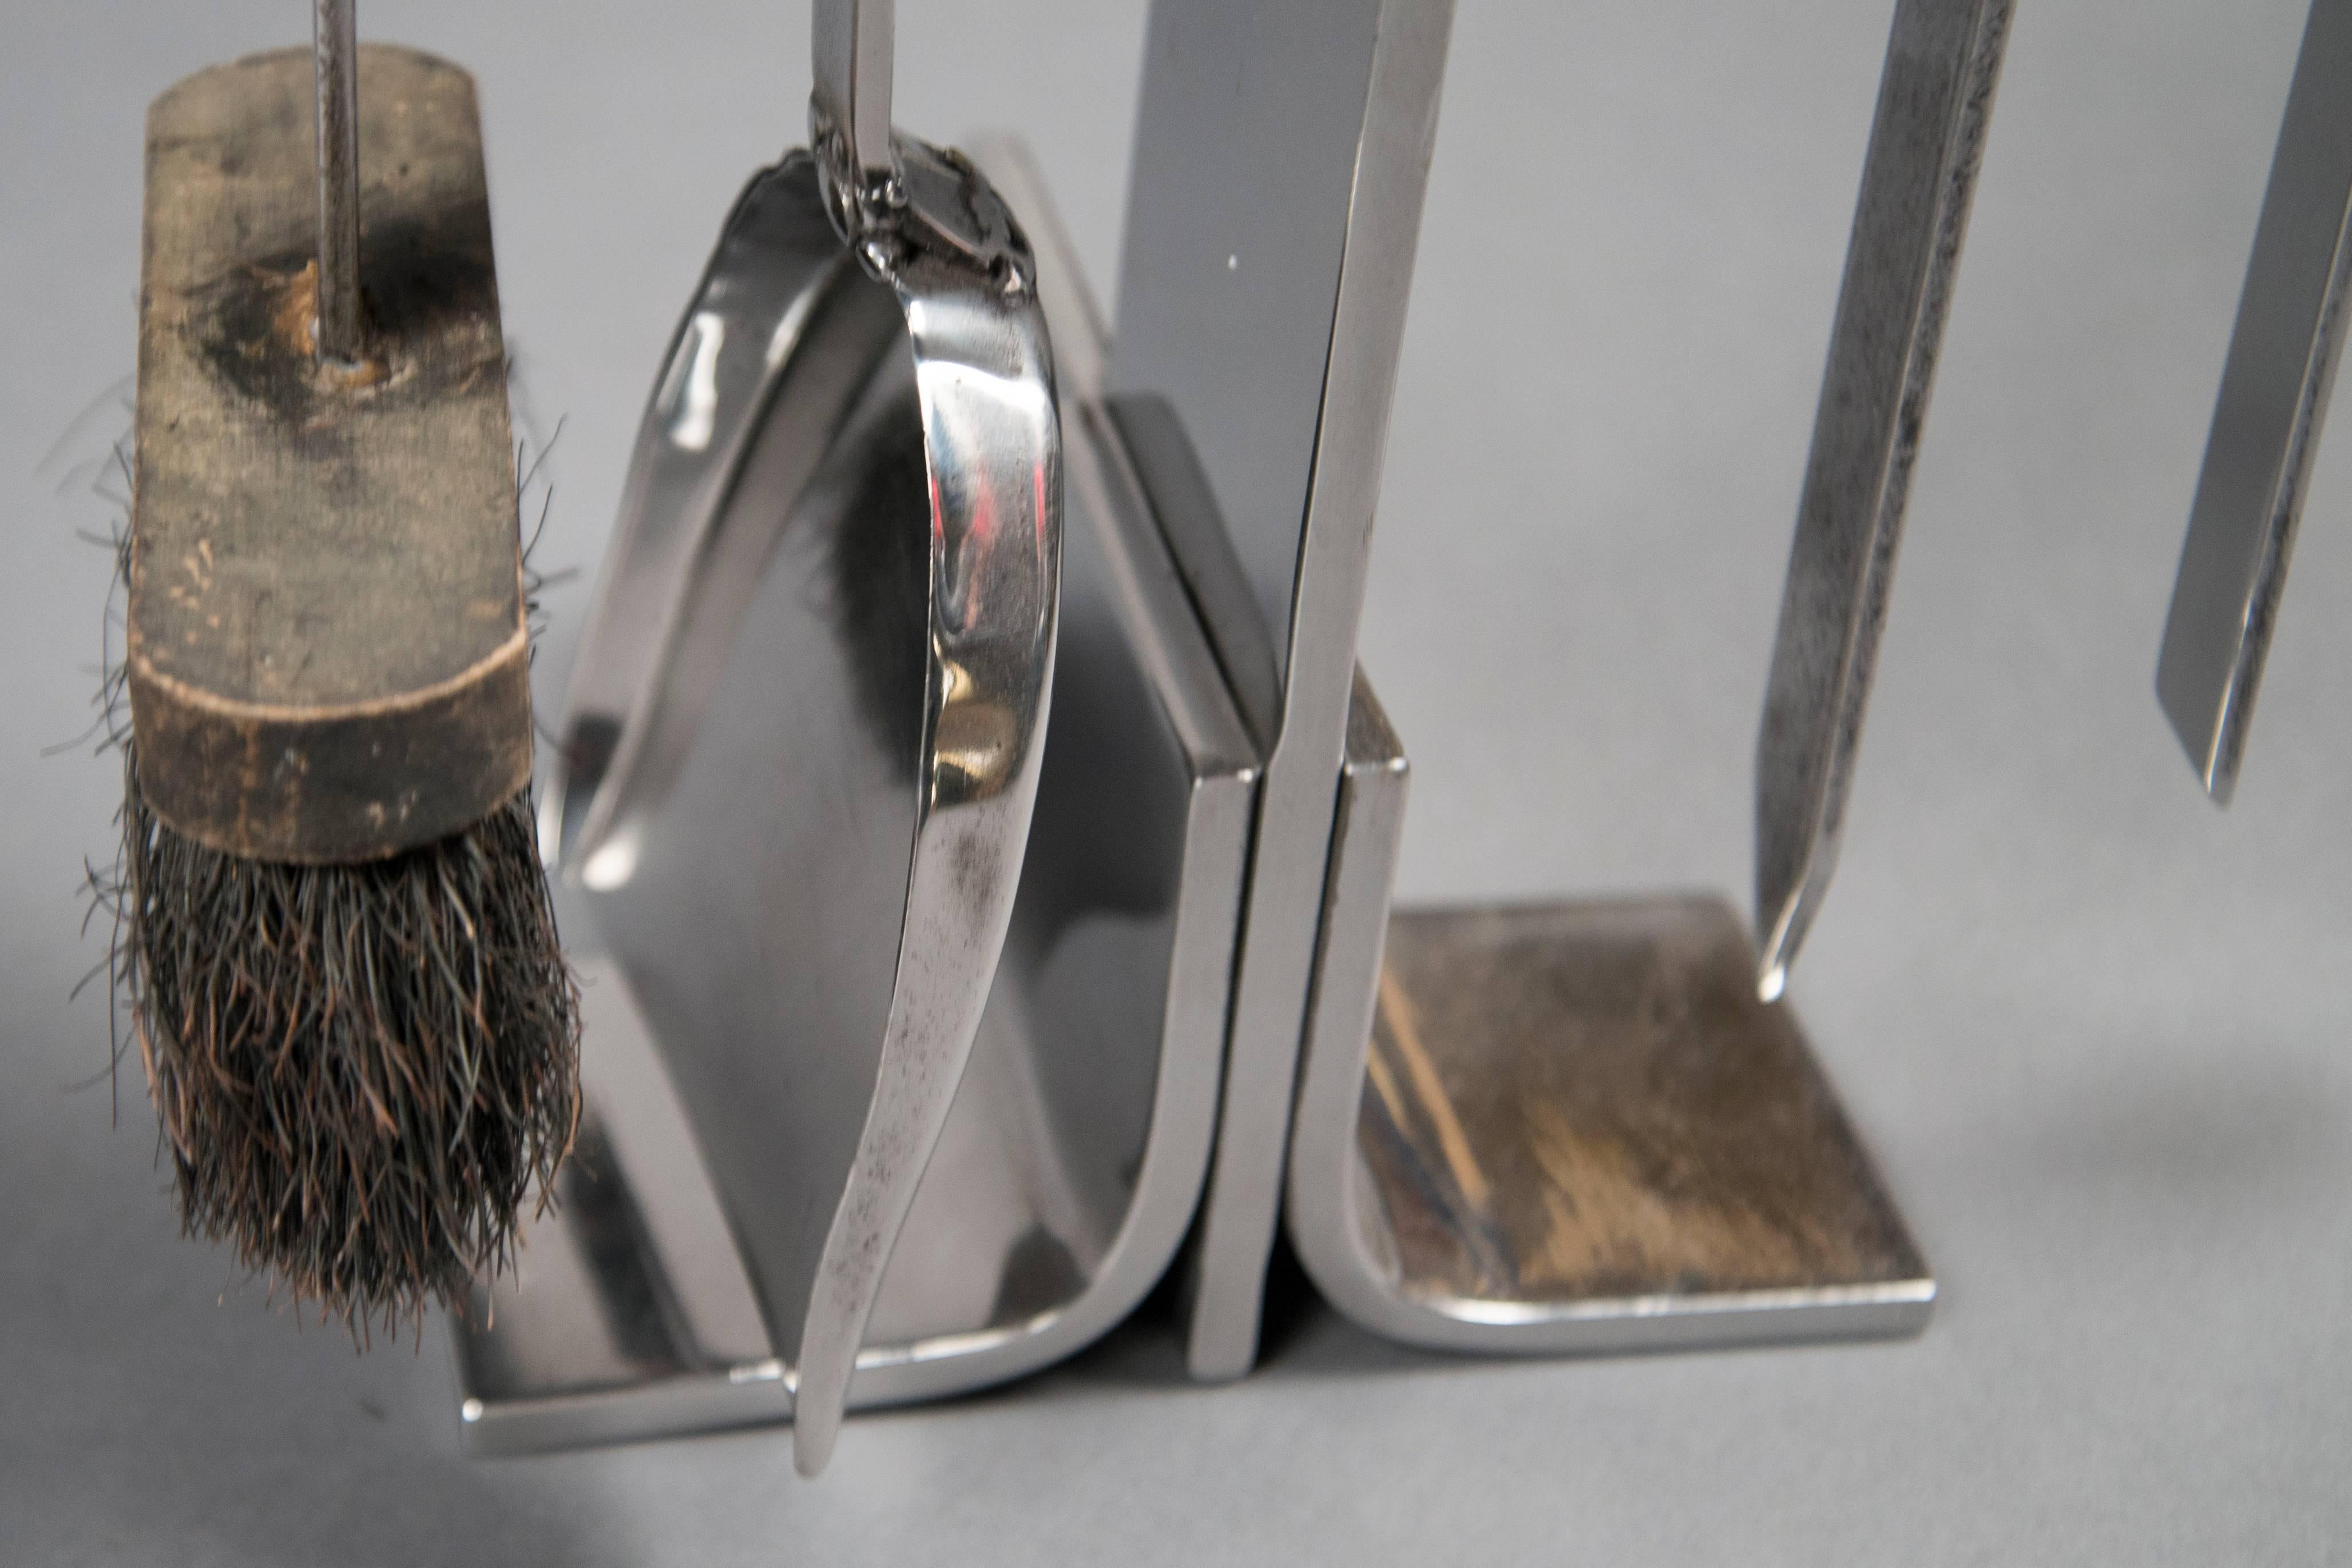 Chrome-plated fire tools, consisting of a shovel, tongs, brush and poker arranged on a stand.
           